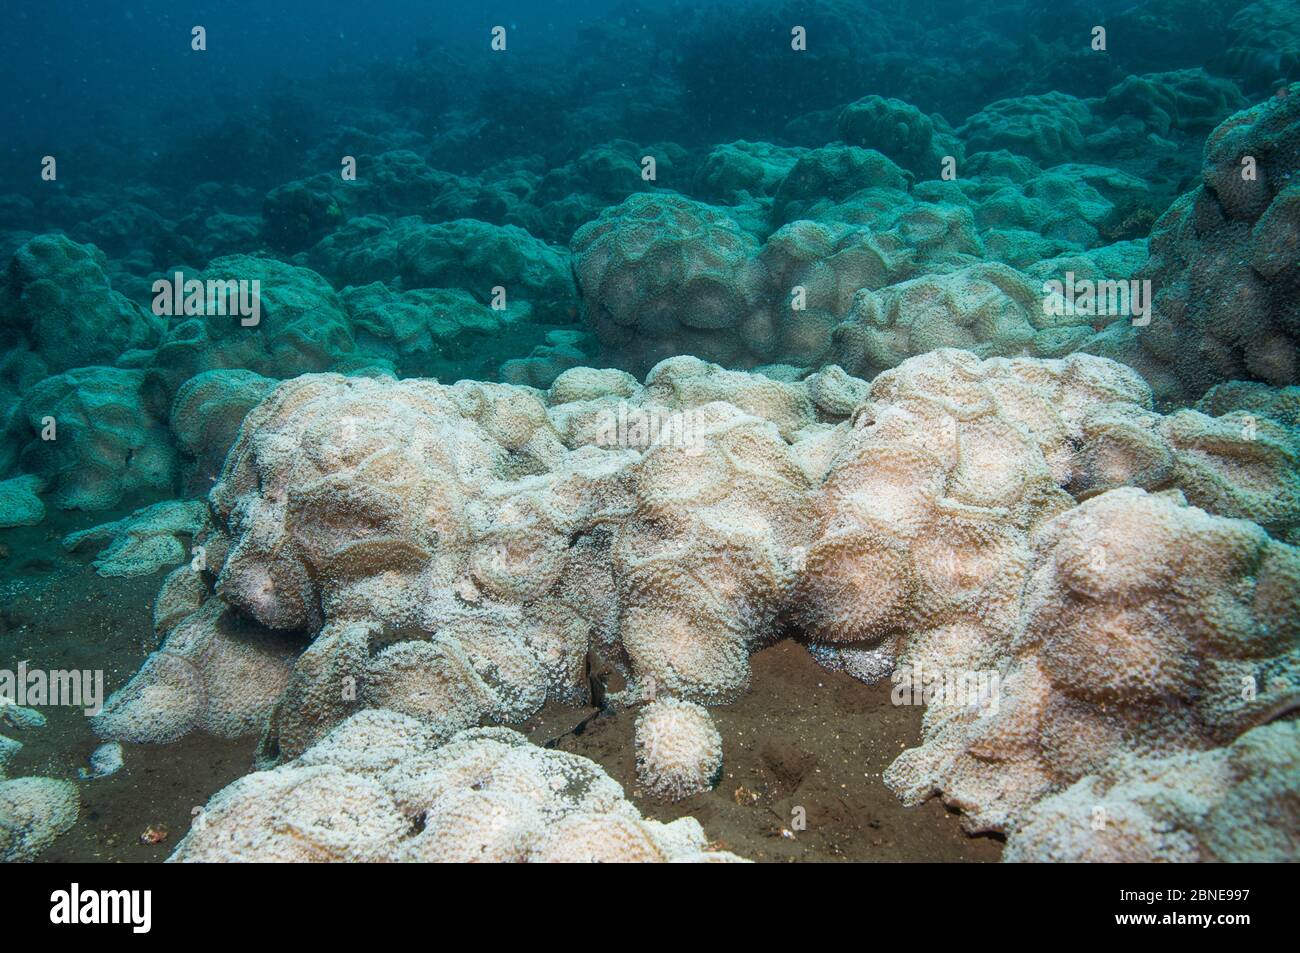 Dense aggregation of Corallimorphs (Discosoma rhodostoma) covering almost the whole reef slope.  Bali, Indonesia. Stock Photo